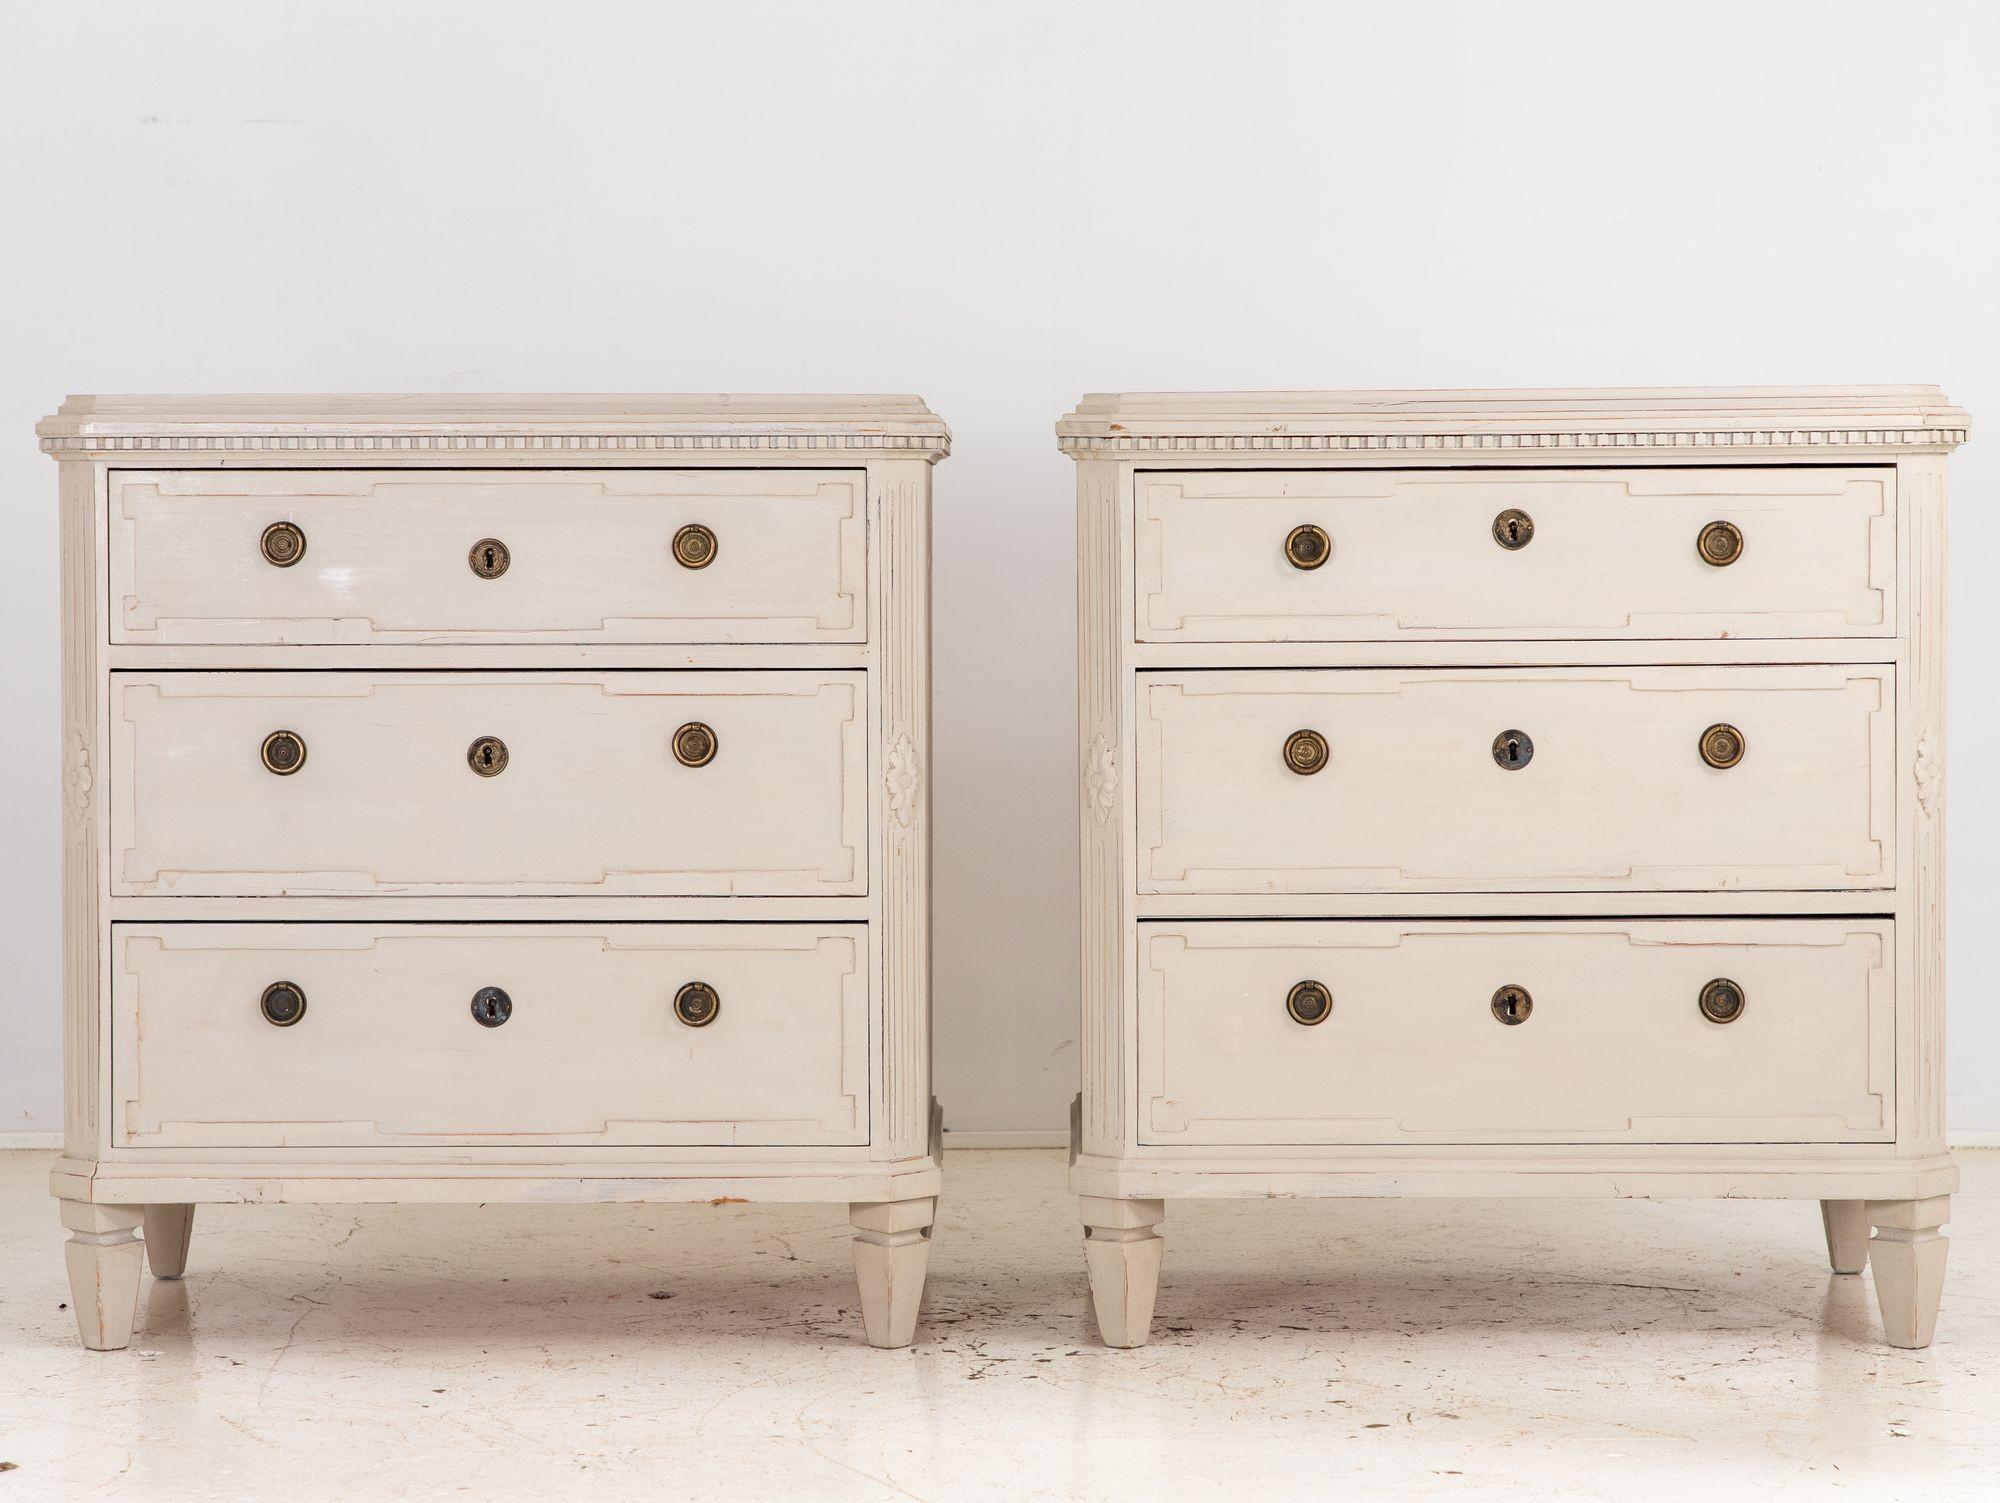 This charming pair of Gustavian-style chests of drawers exudes timeless Swedish elegance. Bathed in a soothing greige paint, they boast three spacious drawers adorned with intricately carved lozenge fronts, adding a touch of sophistication. The